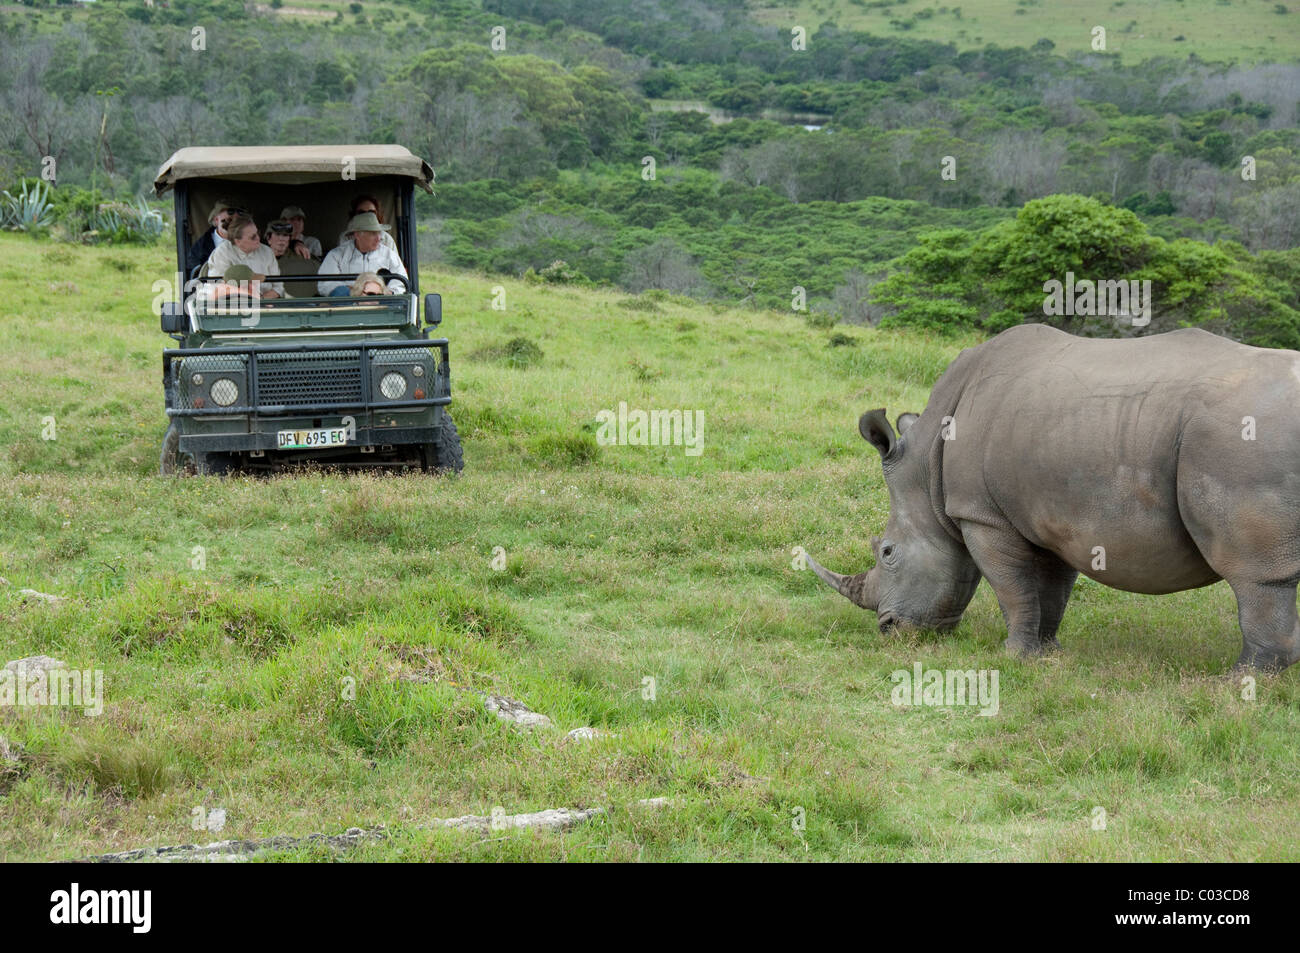 South Africa, Eastern Cape, East London, Inkwenkwezi Private Game Reserve. Safari jeep and African White Rhinoceros. Stock Photo